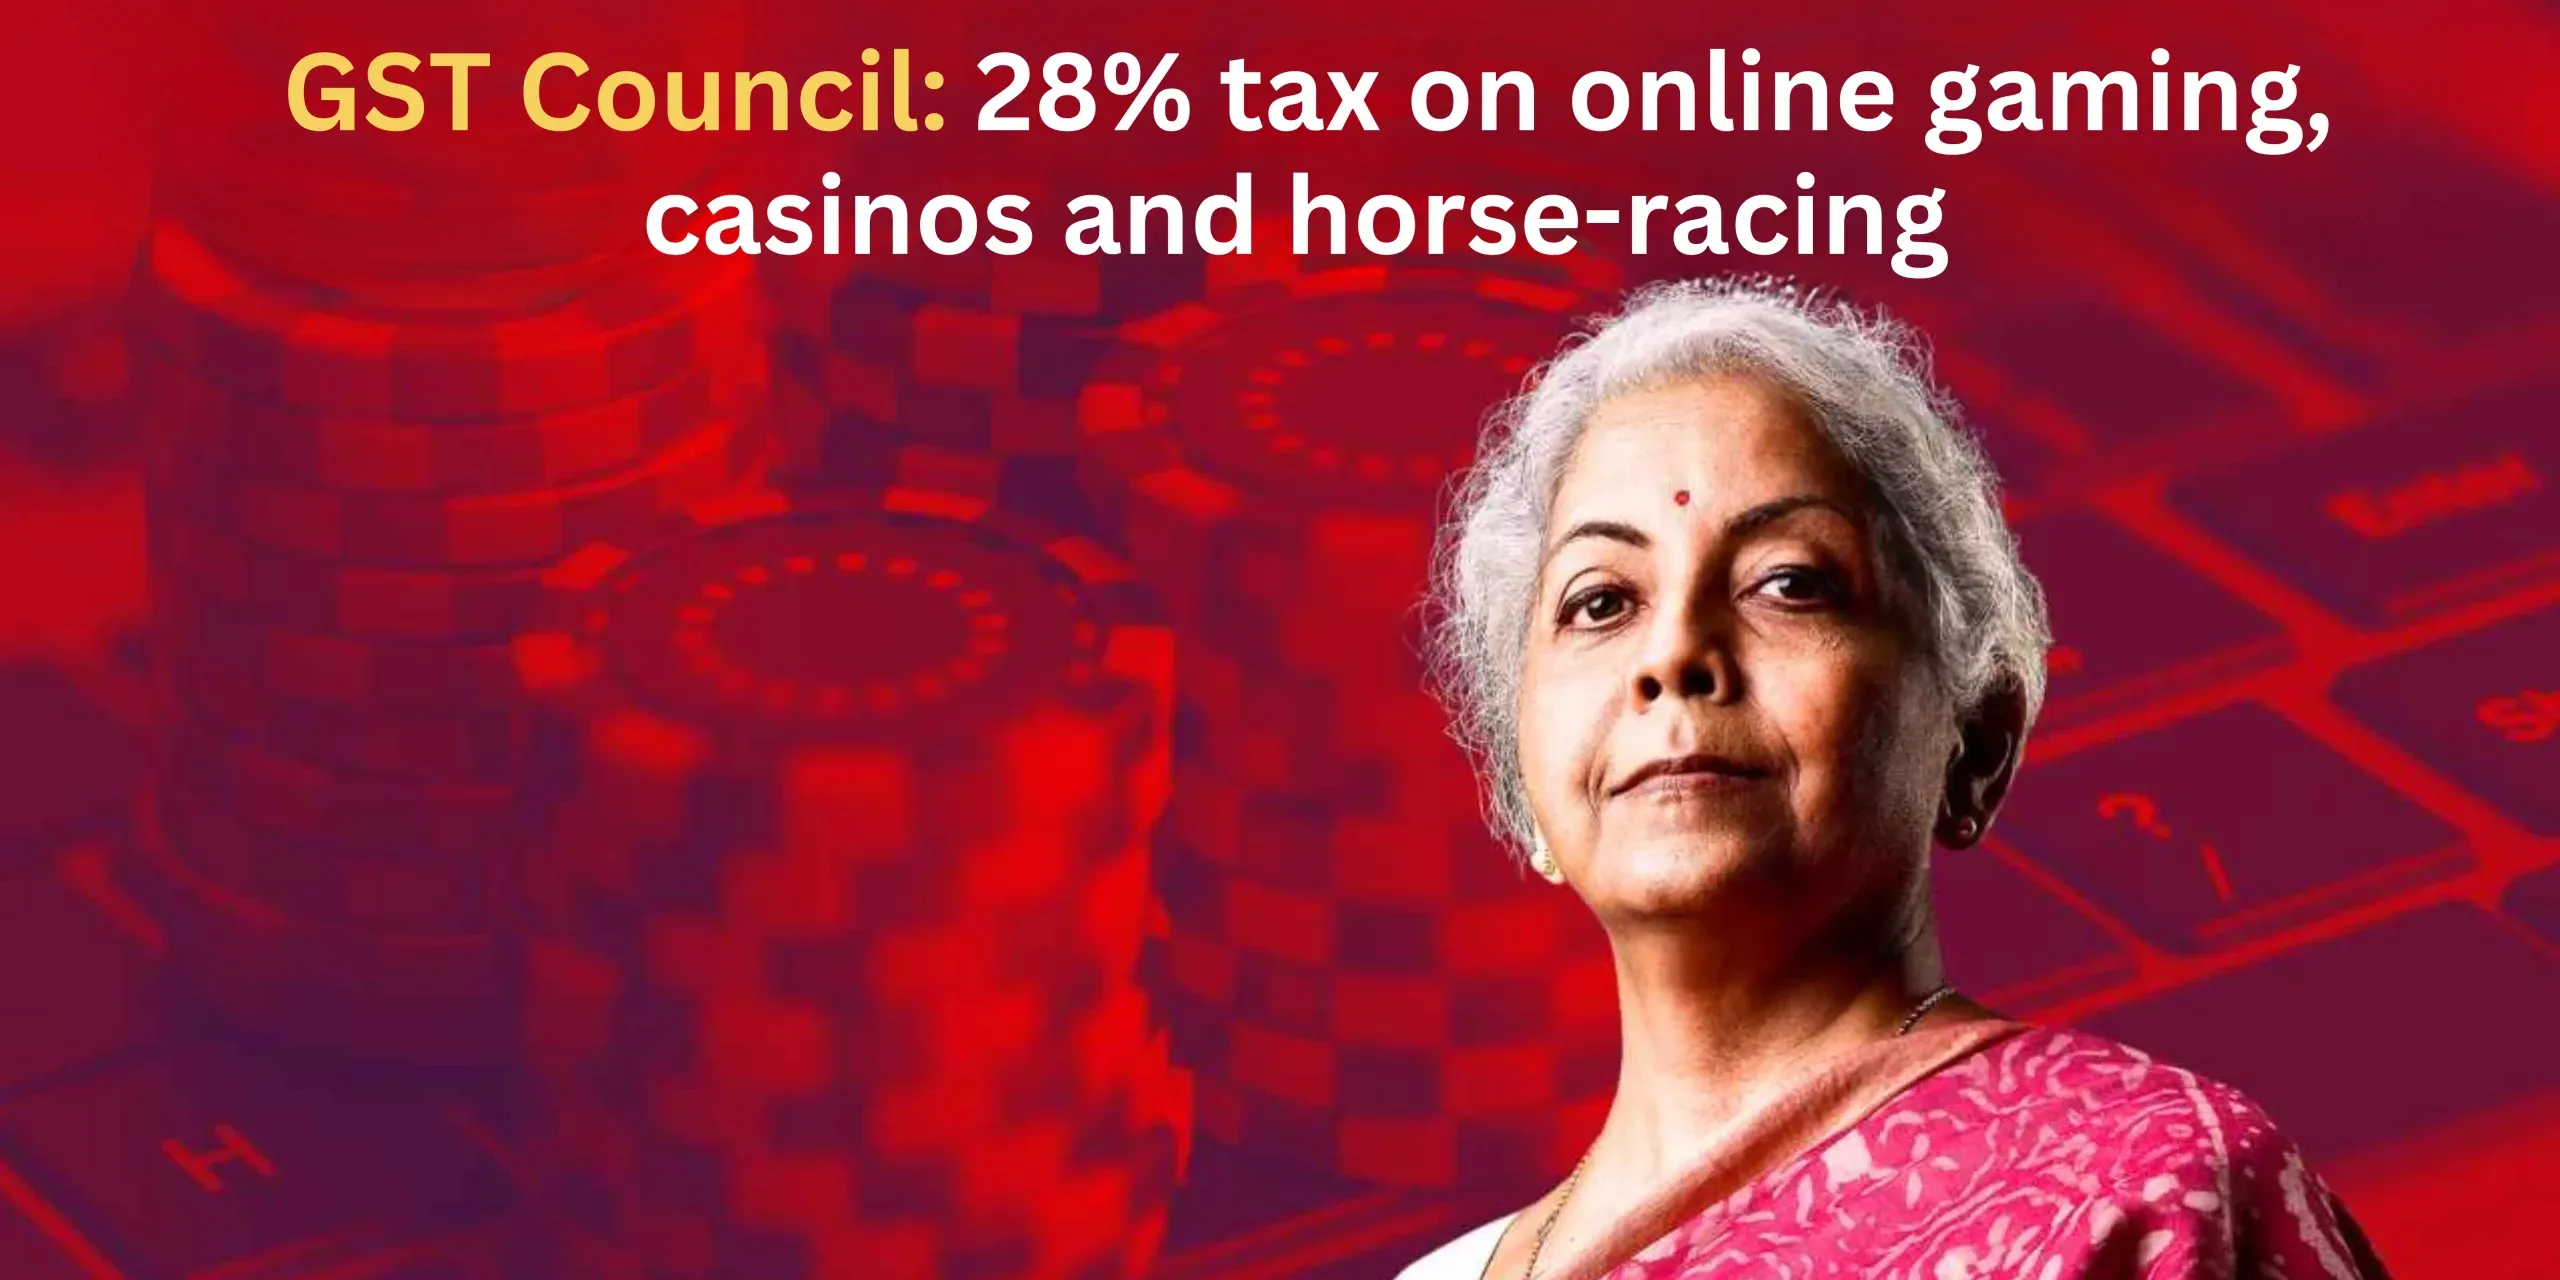 GST Council: 28% tax on online gaming, casinos and horse-racing